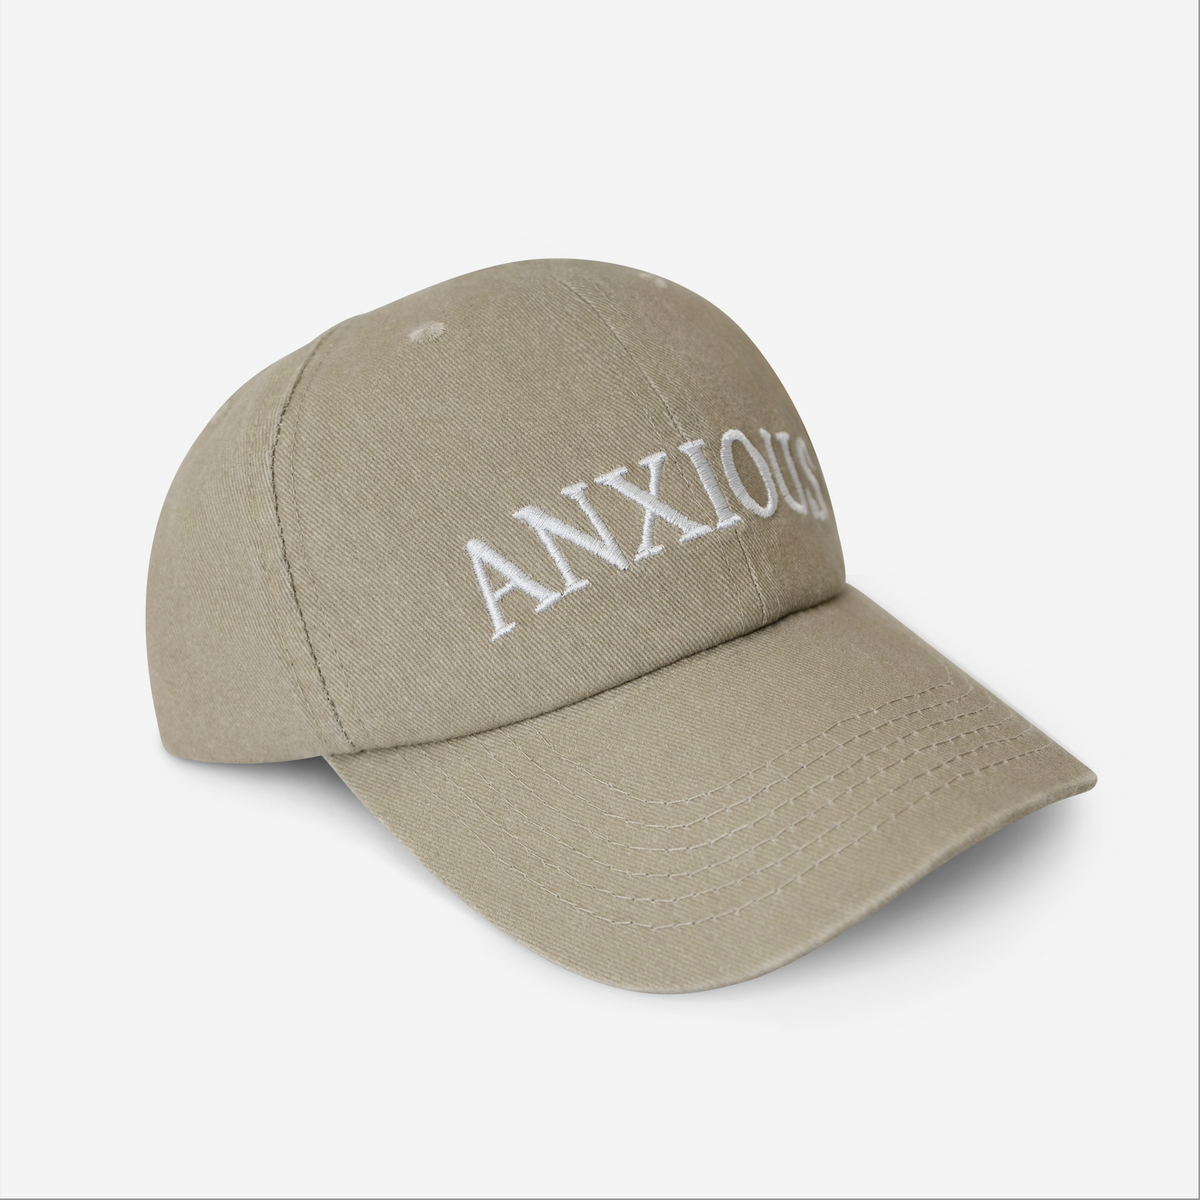 Anxious (this too shall pass) Hat